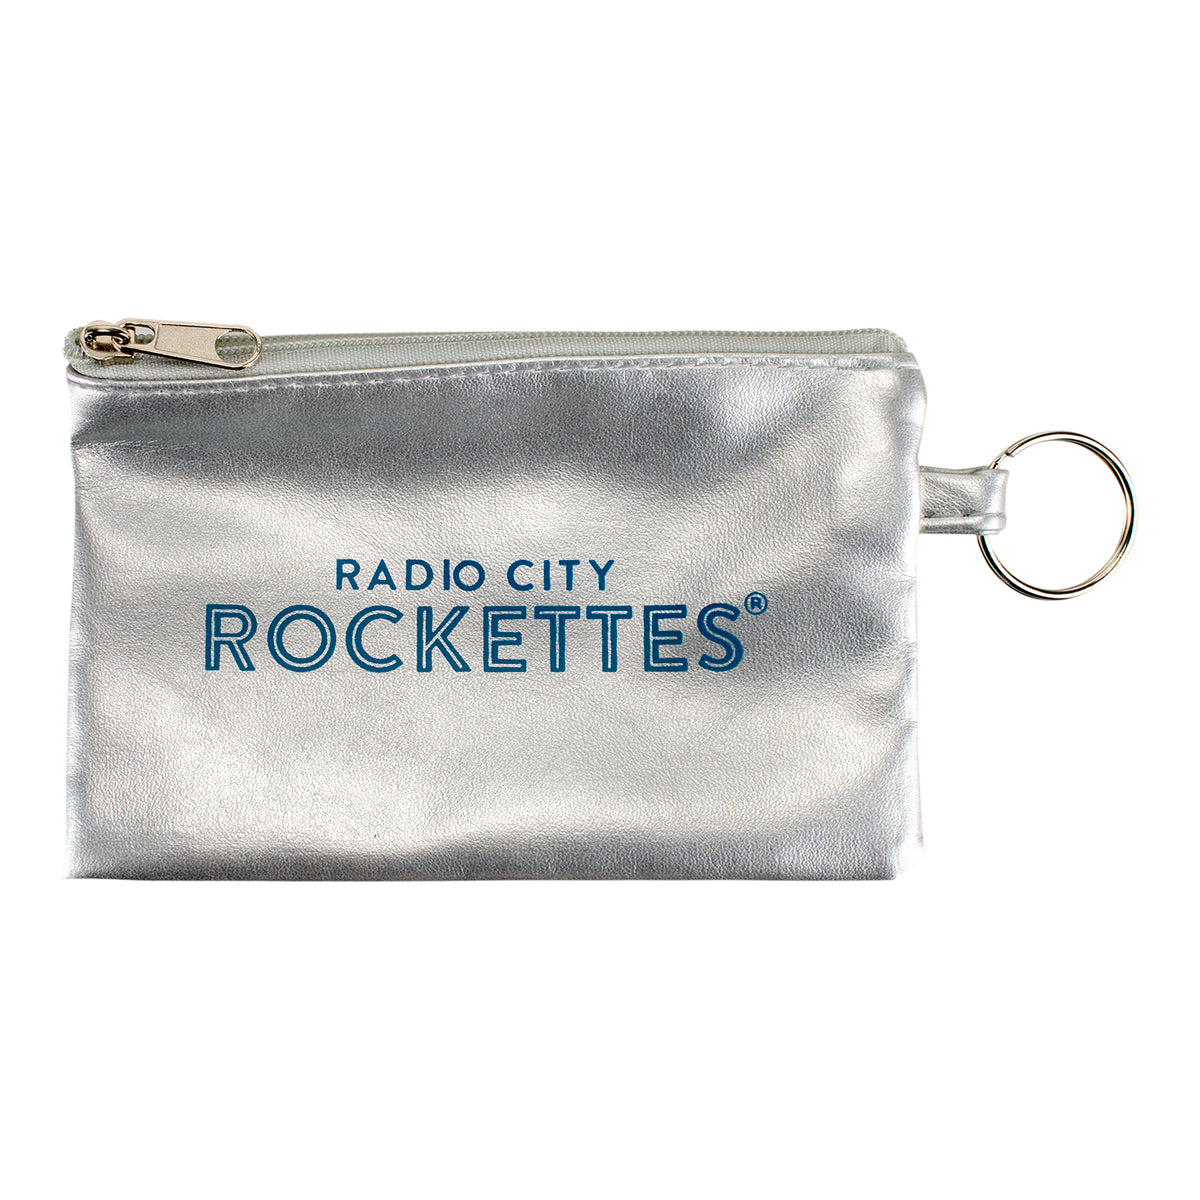 Radio City Rockettes Small Money Pouch with Zipper